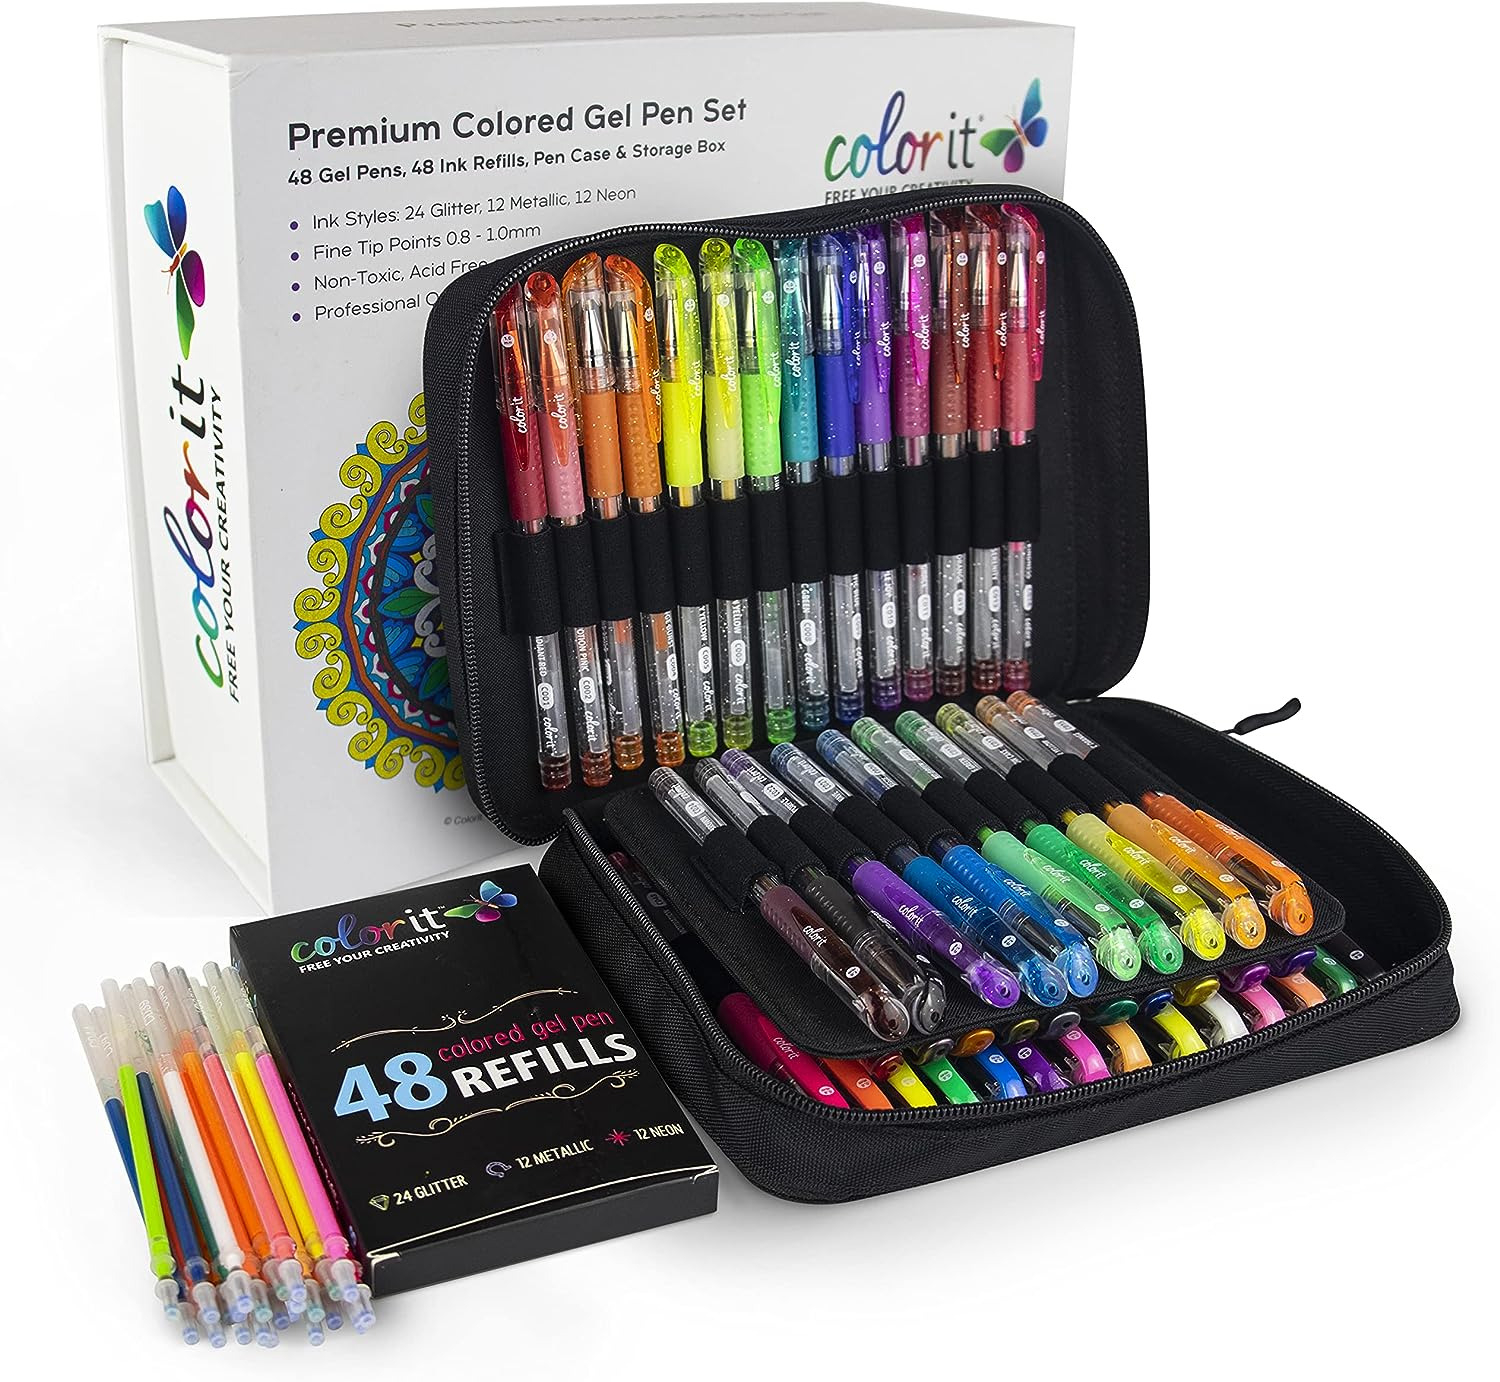 ColorIt Glitter Gel Pens For Adult Coloring Books 96 Pack - 48 Premium Quality G